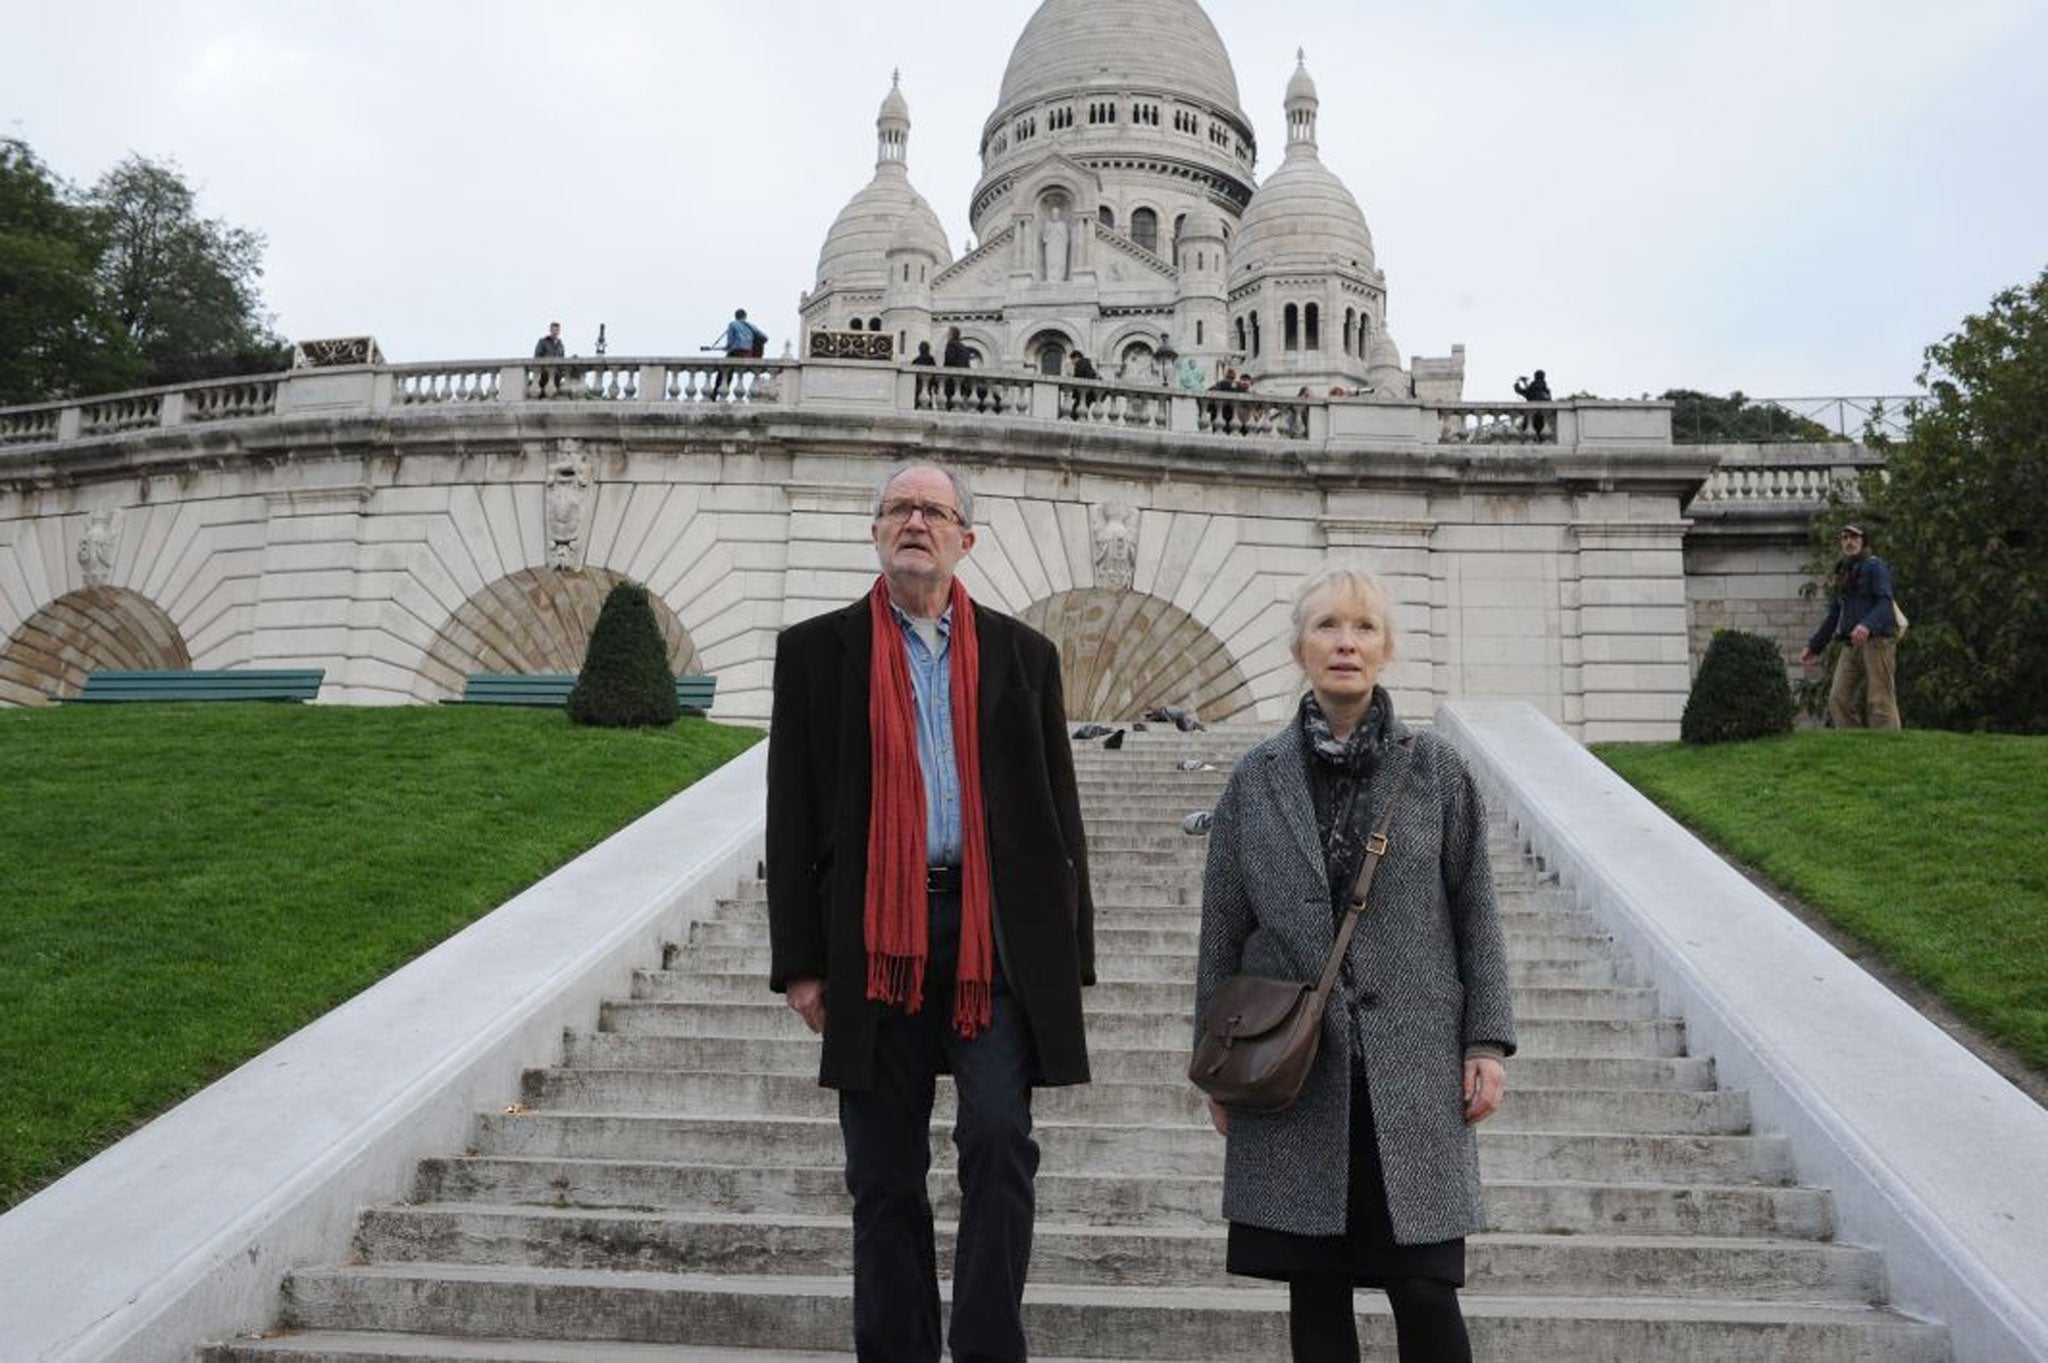 Empty-nesters: Jim Broadbent and Lindsay Duncan star in Roger Michell's comedy drama 'Le Week-End'